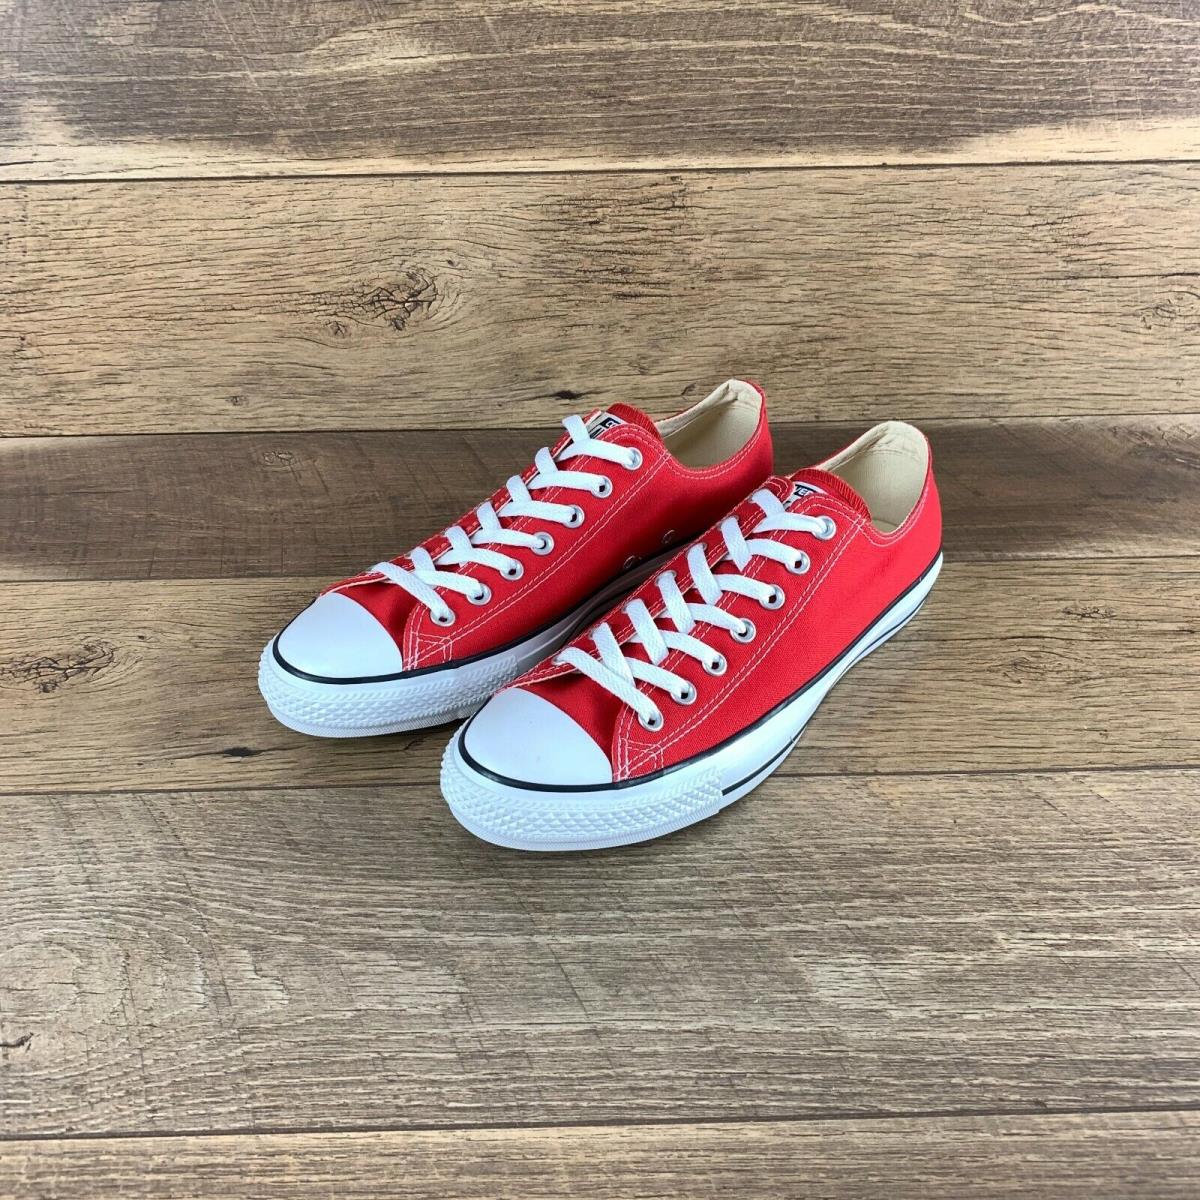 Converse All Star Low Top Red Shoes M9696C Unisex Men`s 10 or Women`s 12 US